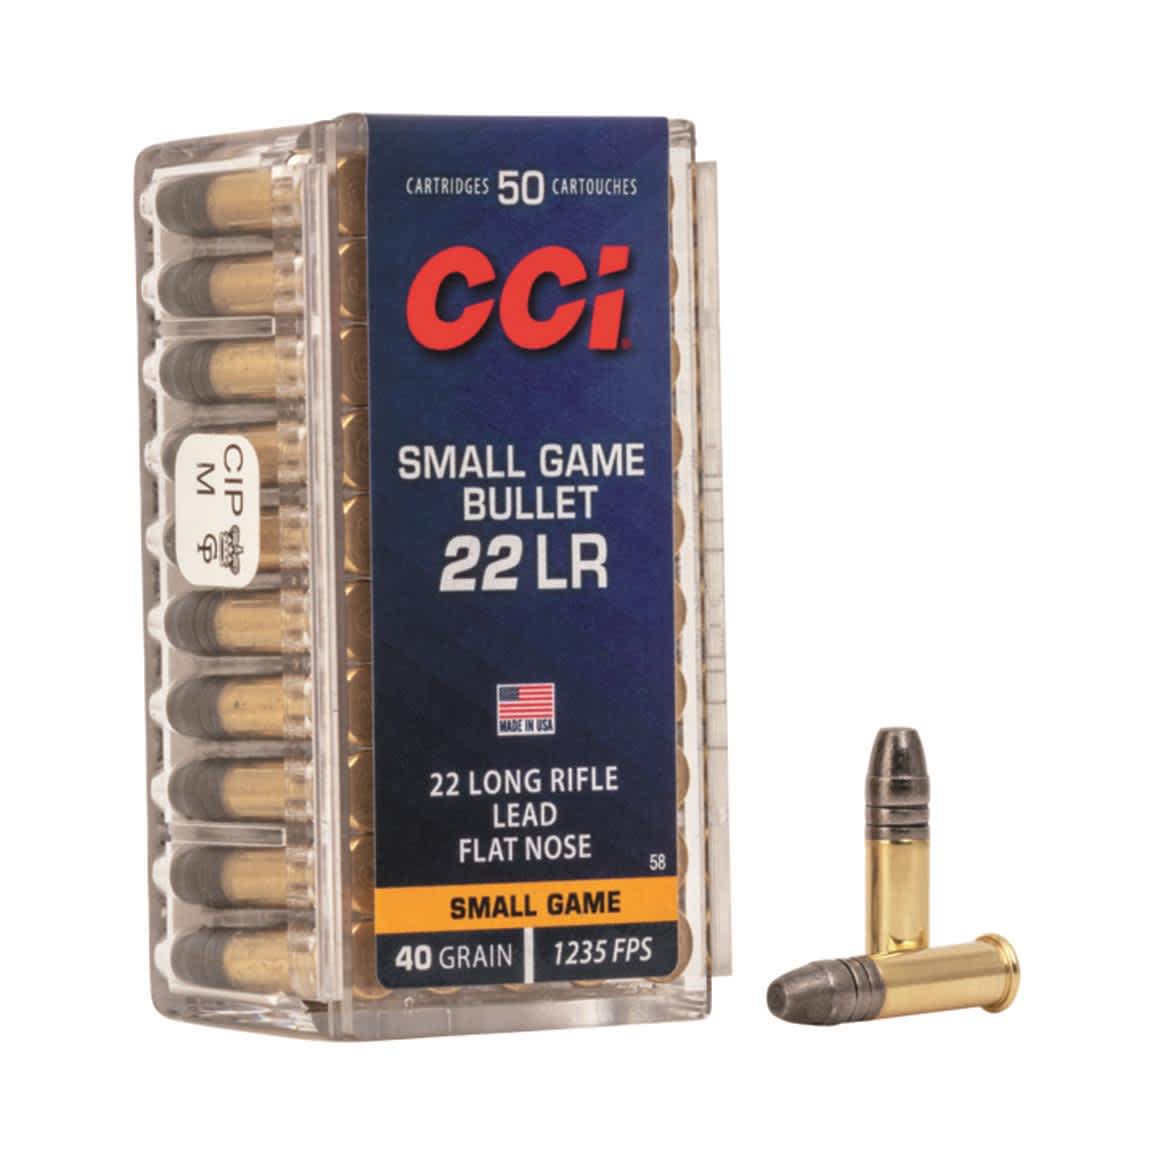 CCI SGB Small Game Bullet) 